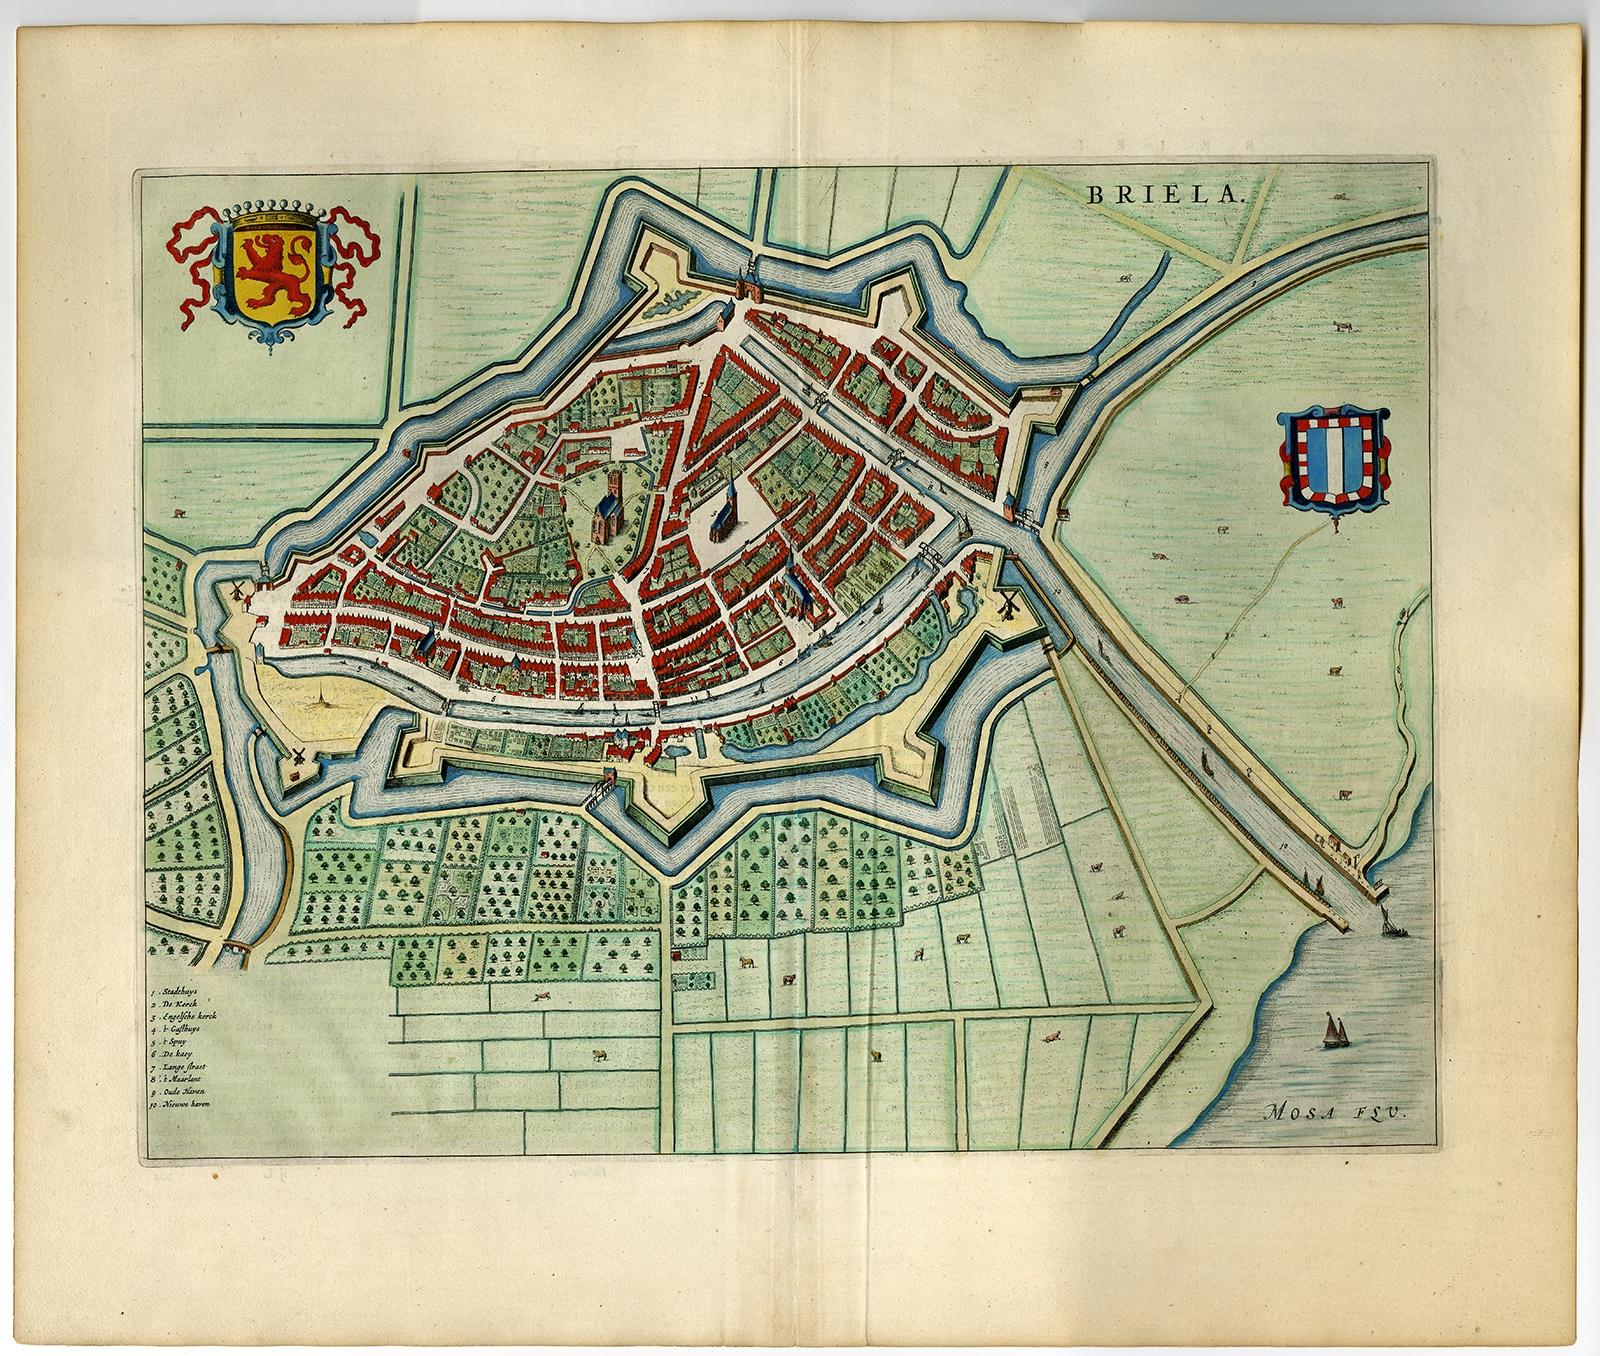 Antique print, titled: 'Briela.' 

Bird's-eye view plan of Brielle in The Netherlands. With key to locations and coats of arms. Text in Dutch on verso. This plan originates from the famous city Atlas: 'Toneel der Steeden' published by Joan Blaeu